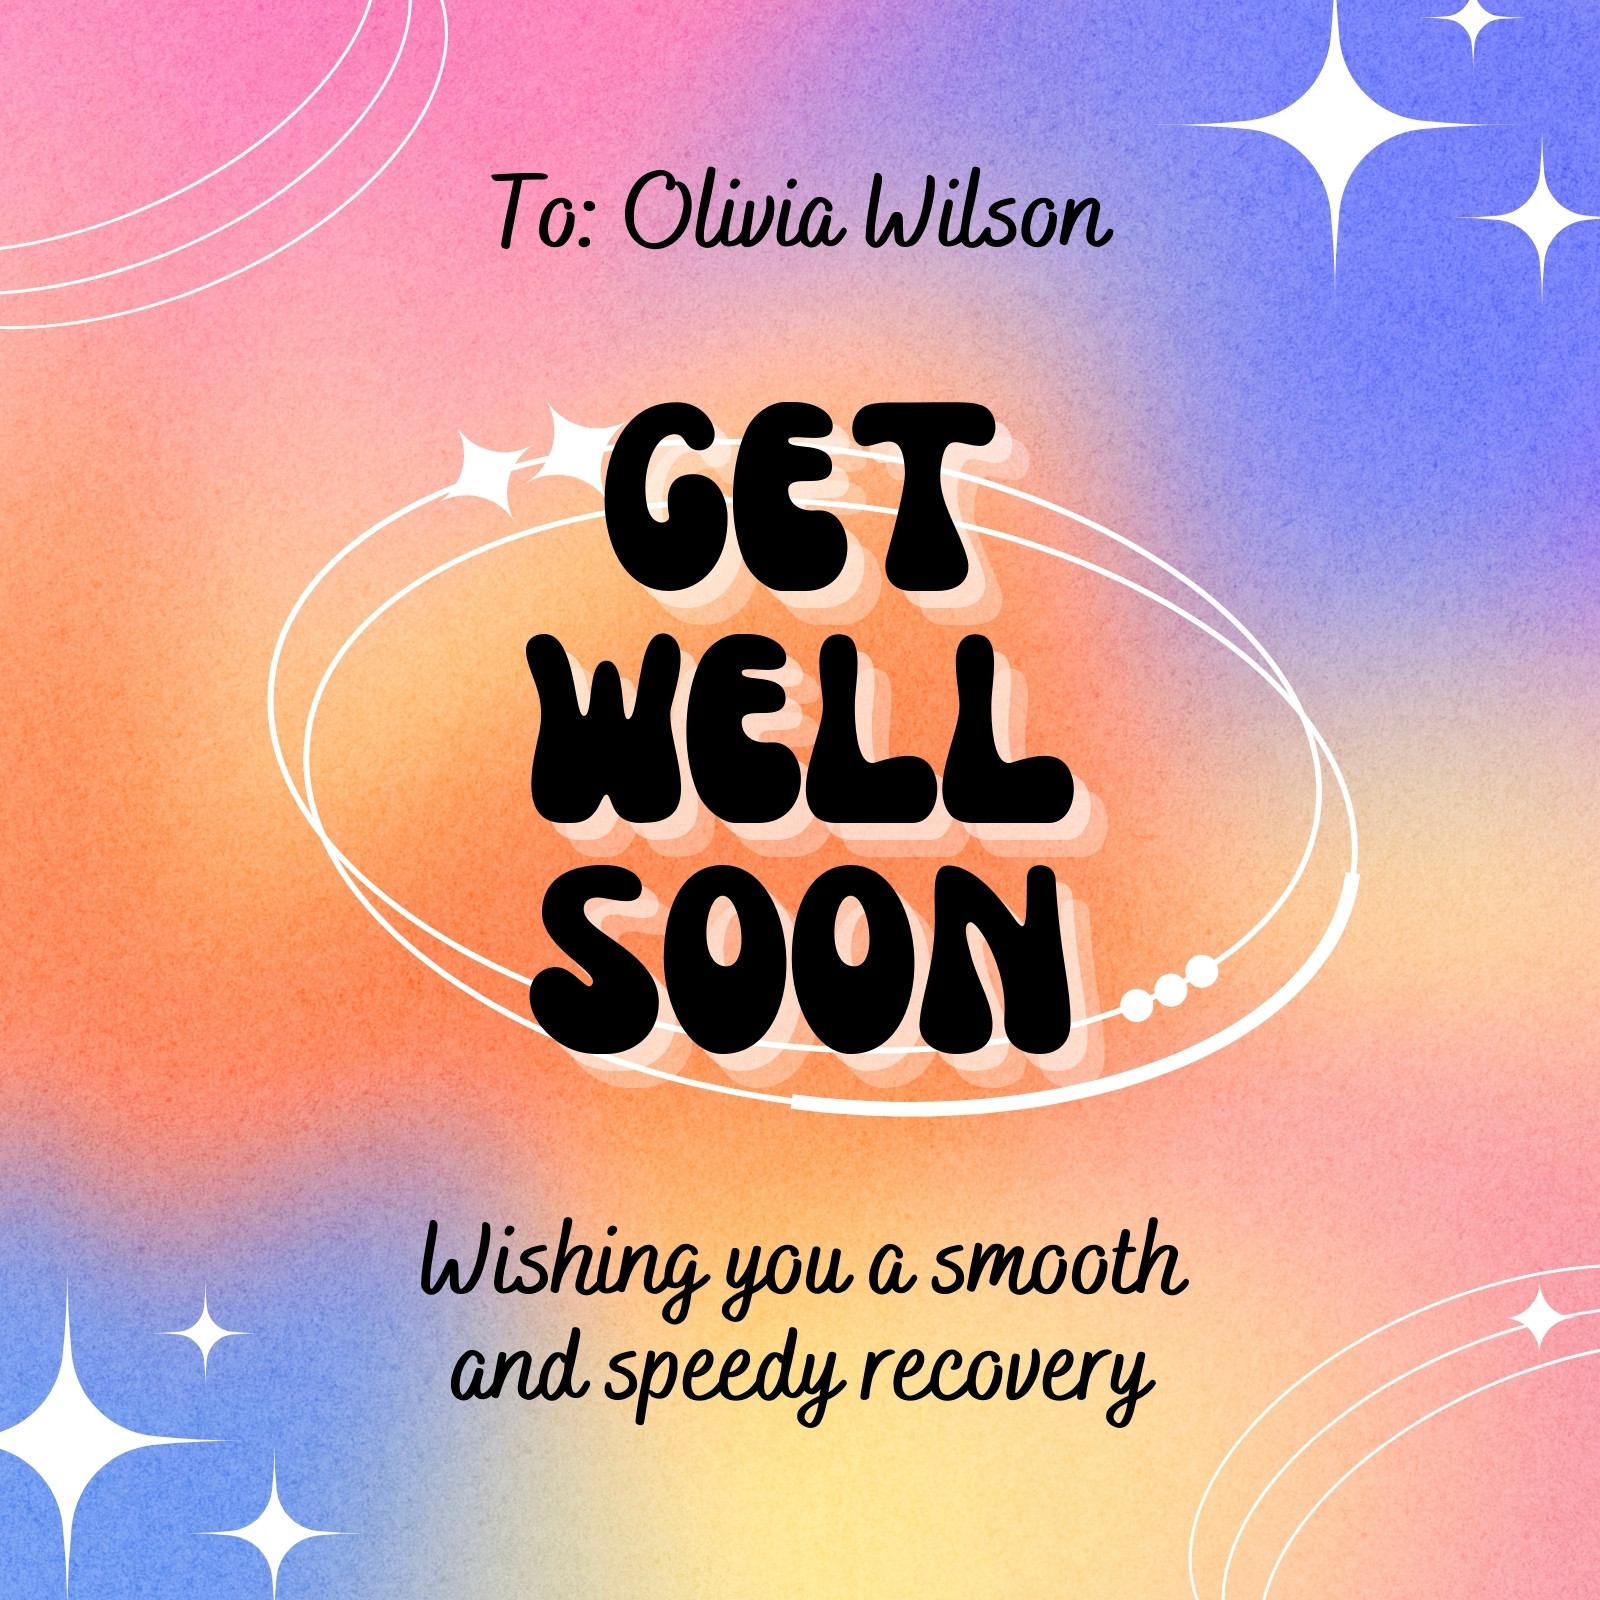 Seagreen Get Well Soon Background Royalty-Free Stock Image - Storyblocks